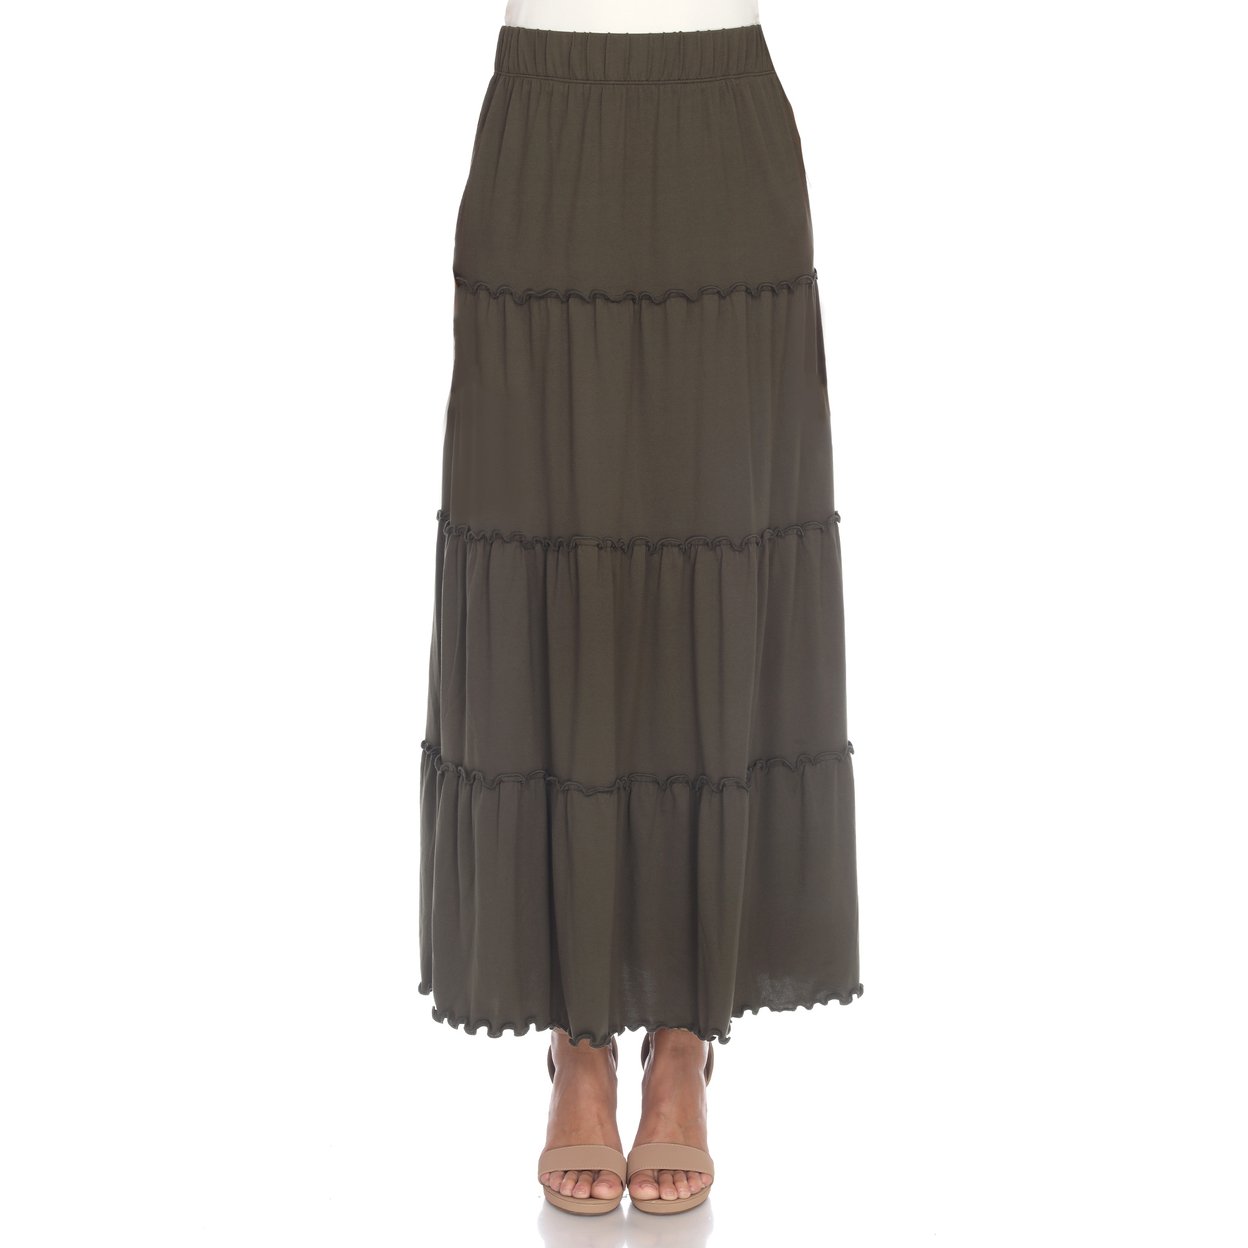 White Mark Women's Tiered Maxi Skirt With Pockets - Olive, Medium